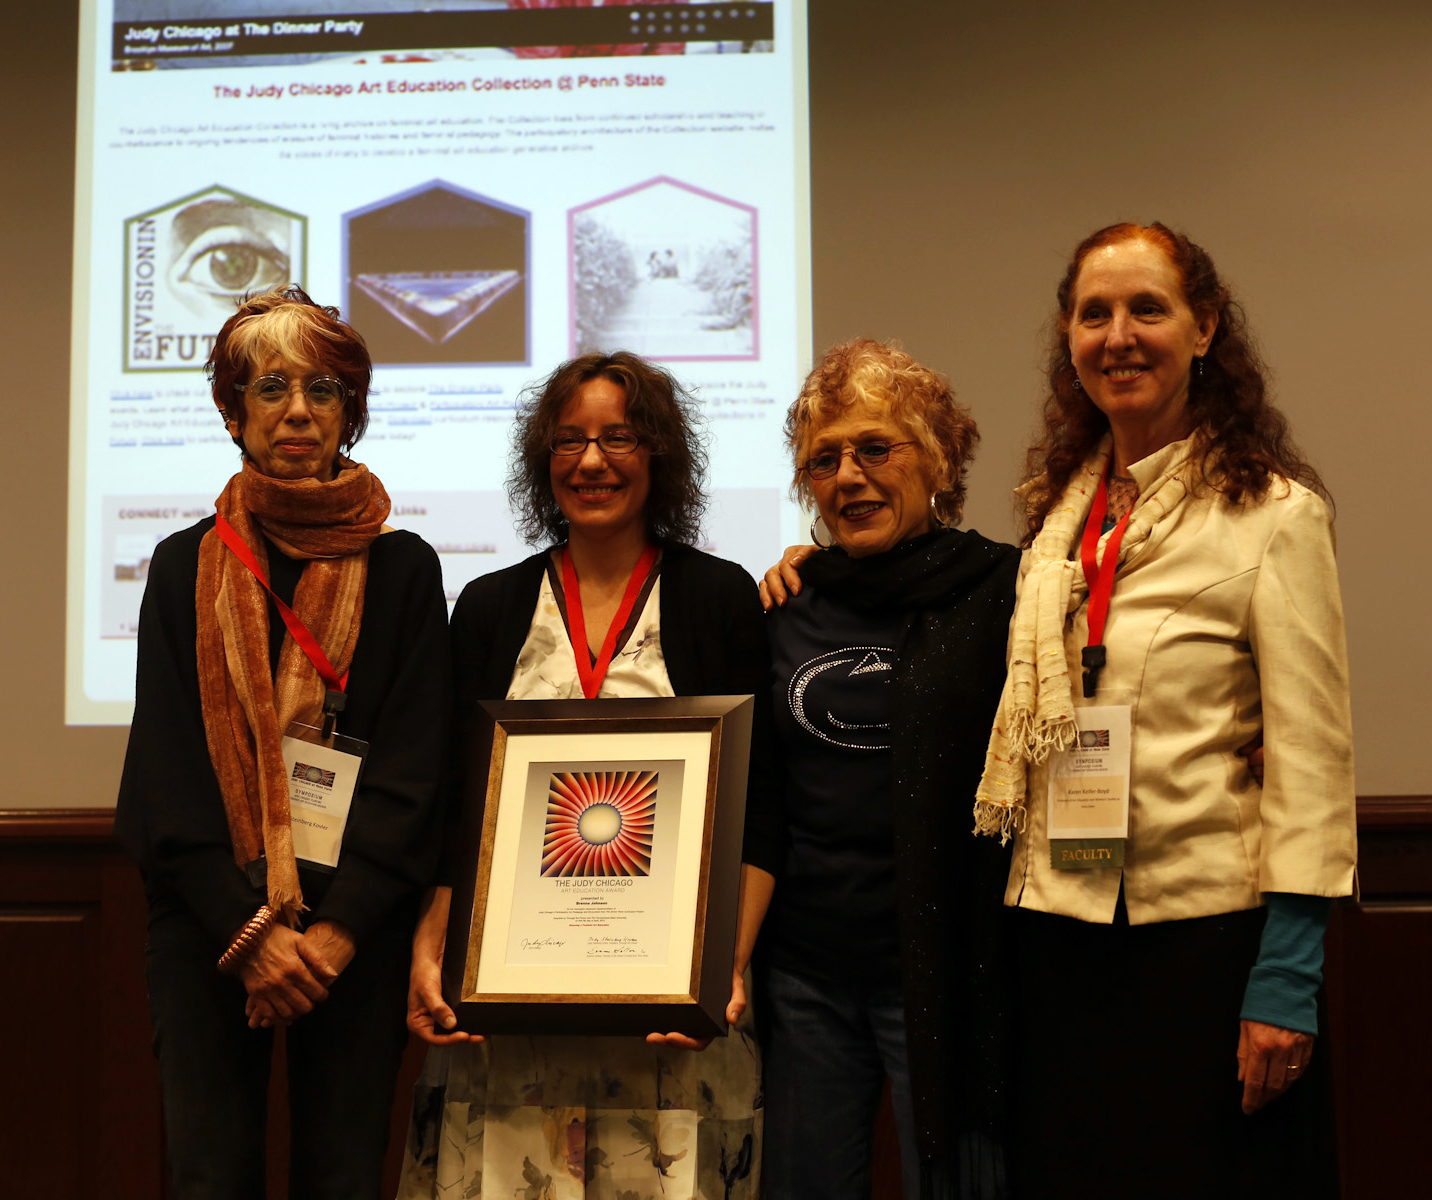 The award ceremony was part of the Judy Chicago Symposium held at Penn State on April 5, 2014. In photo:Judy Kovler, Brenna Johnson, Judy Chicago, Karen Keifer-Boyd